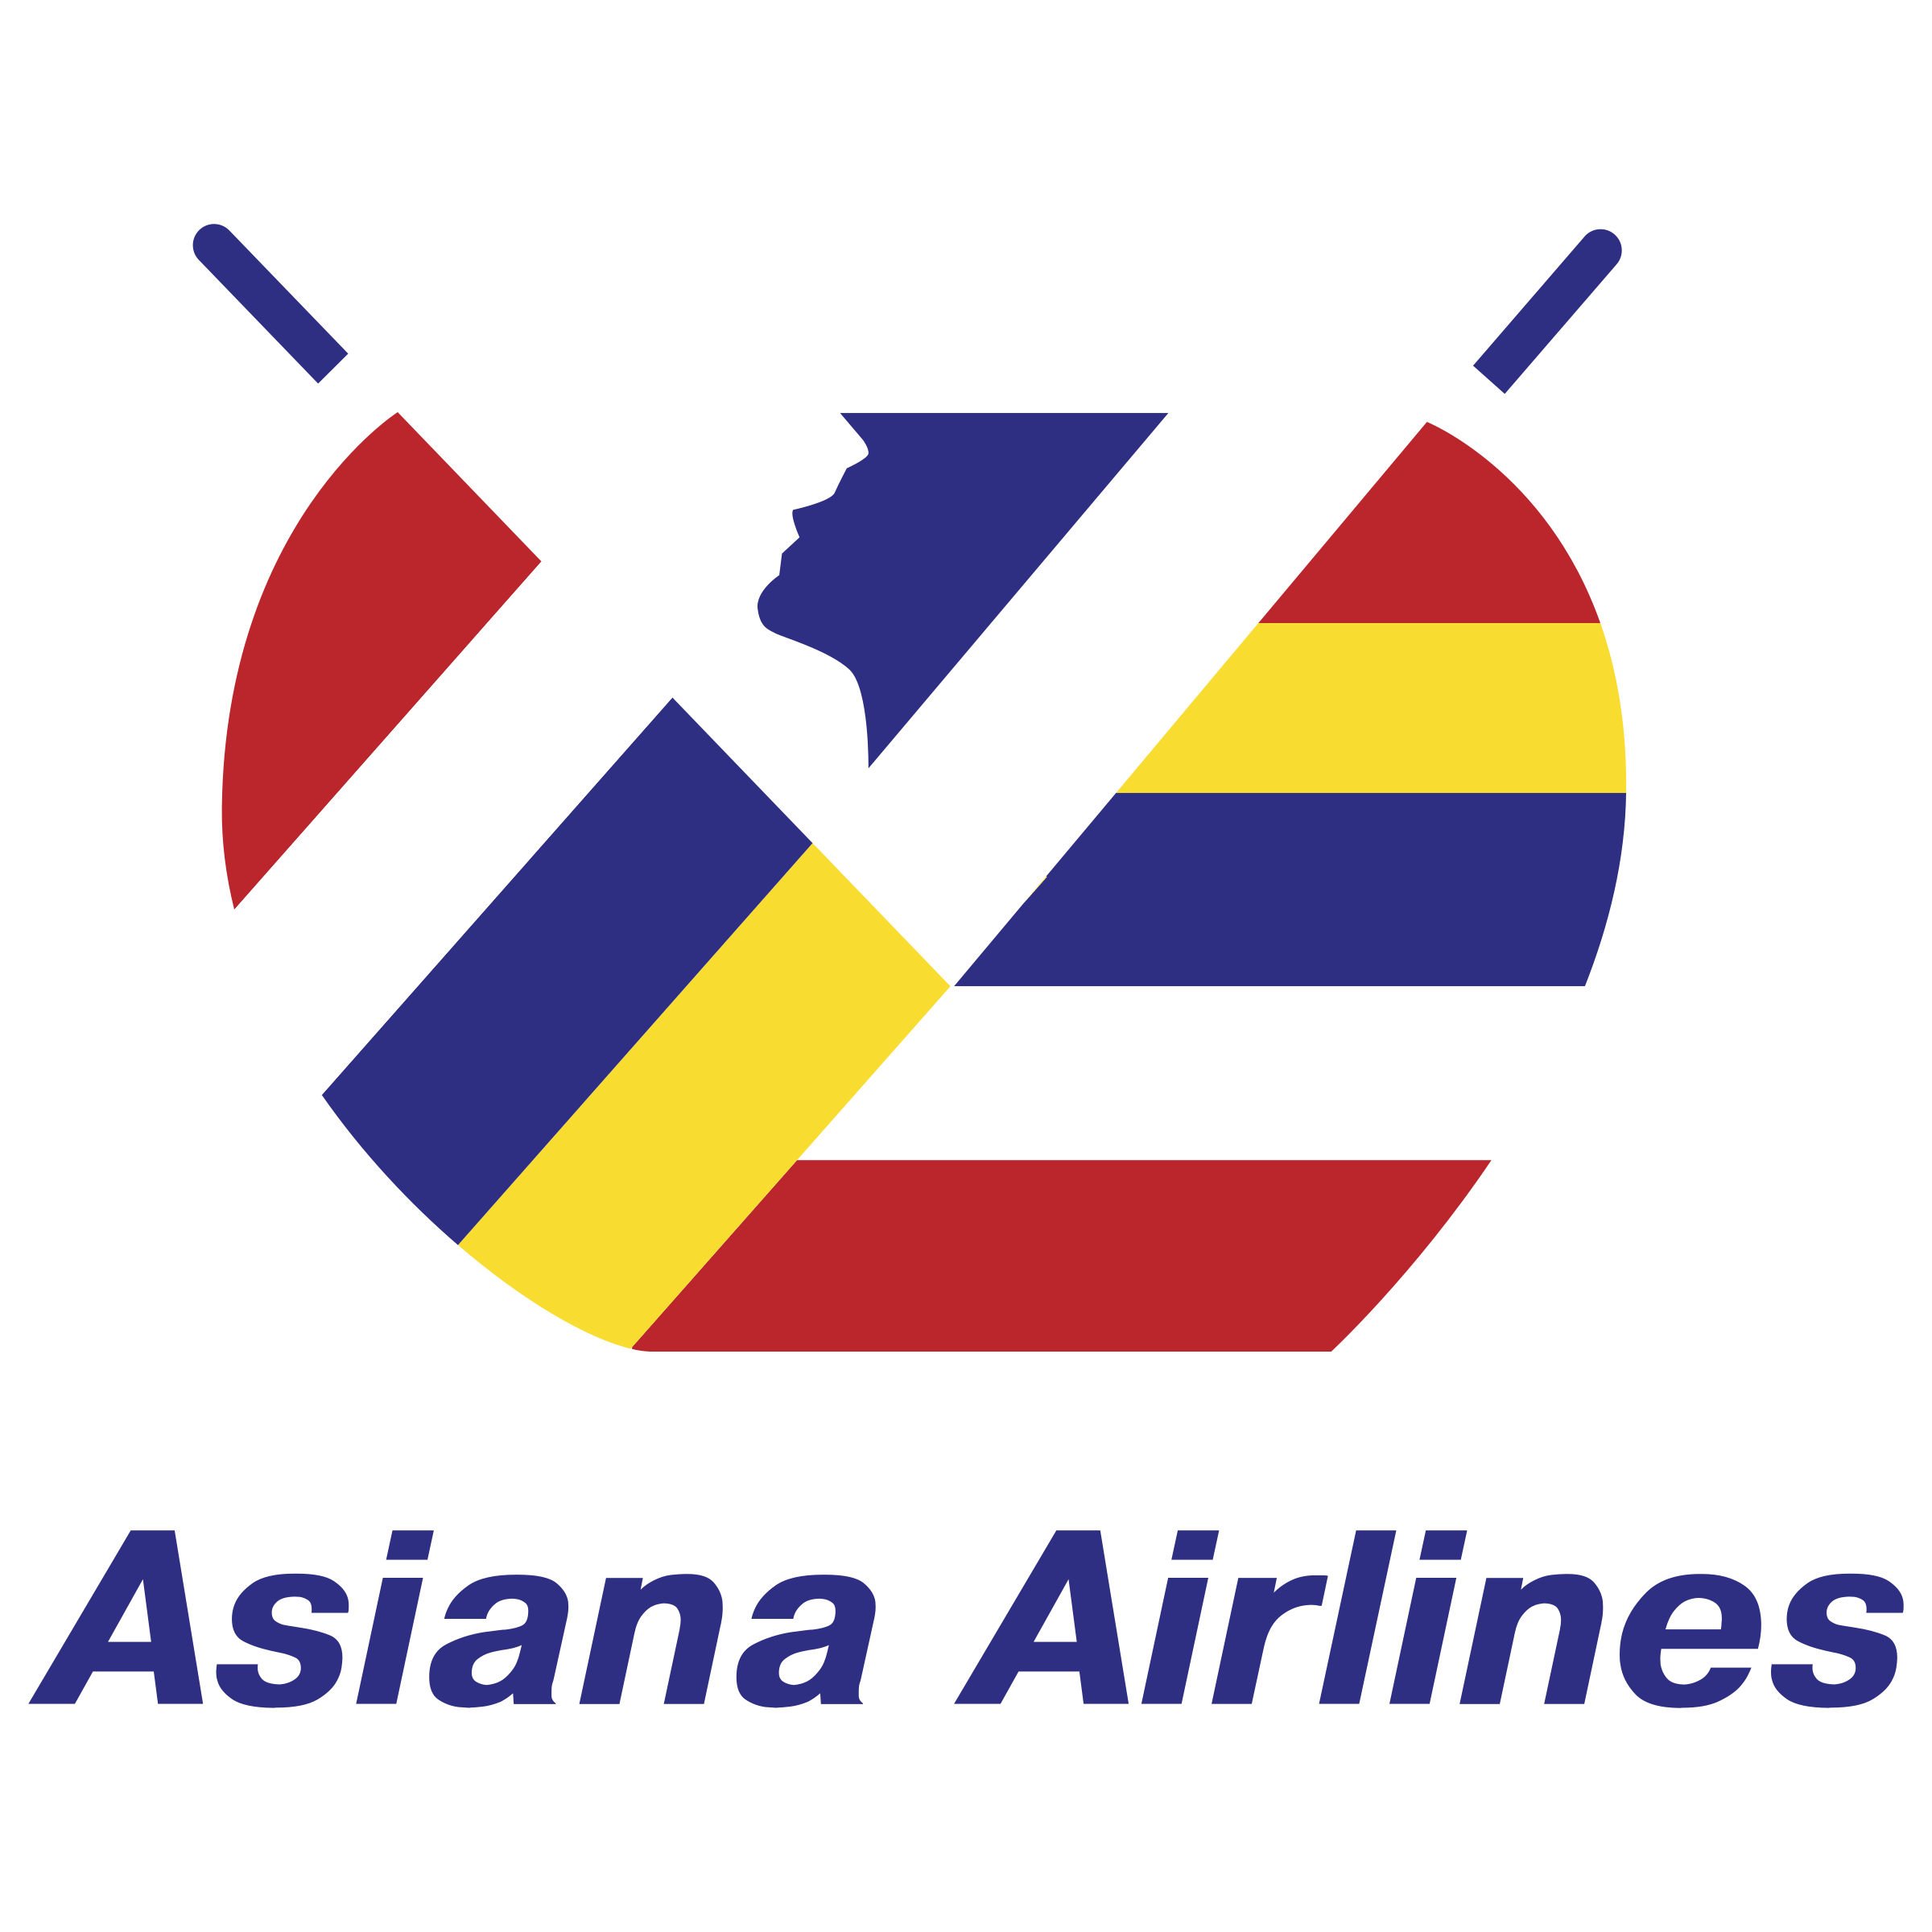 Asiana Logo - Asiana Airlines 01 Logo PNG Transparent & SVG Vector - Freebie Supply